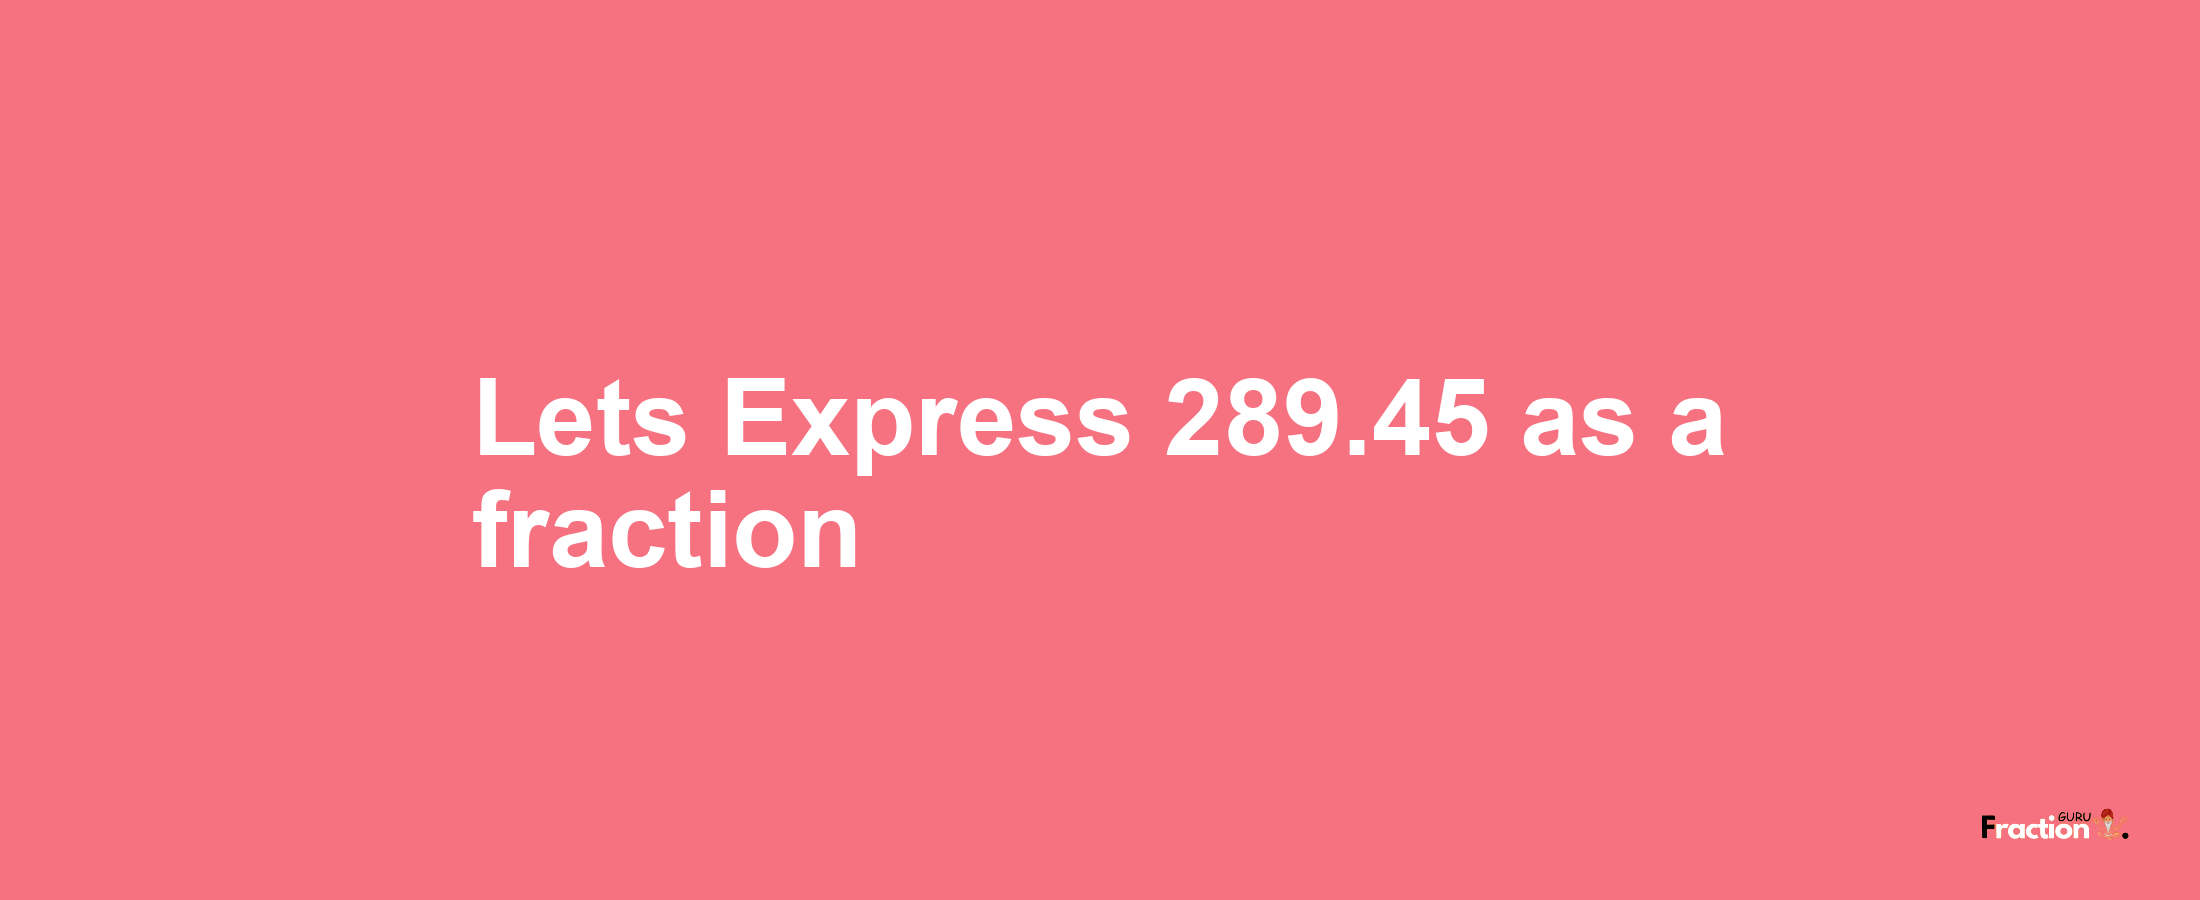 Lets Express 289.45 as afraction